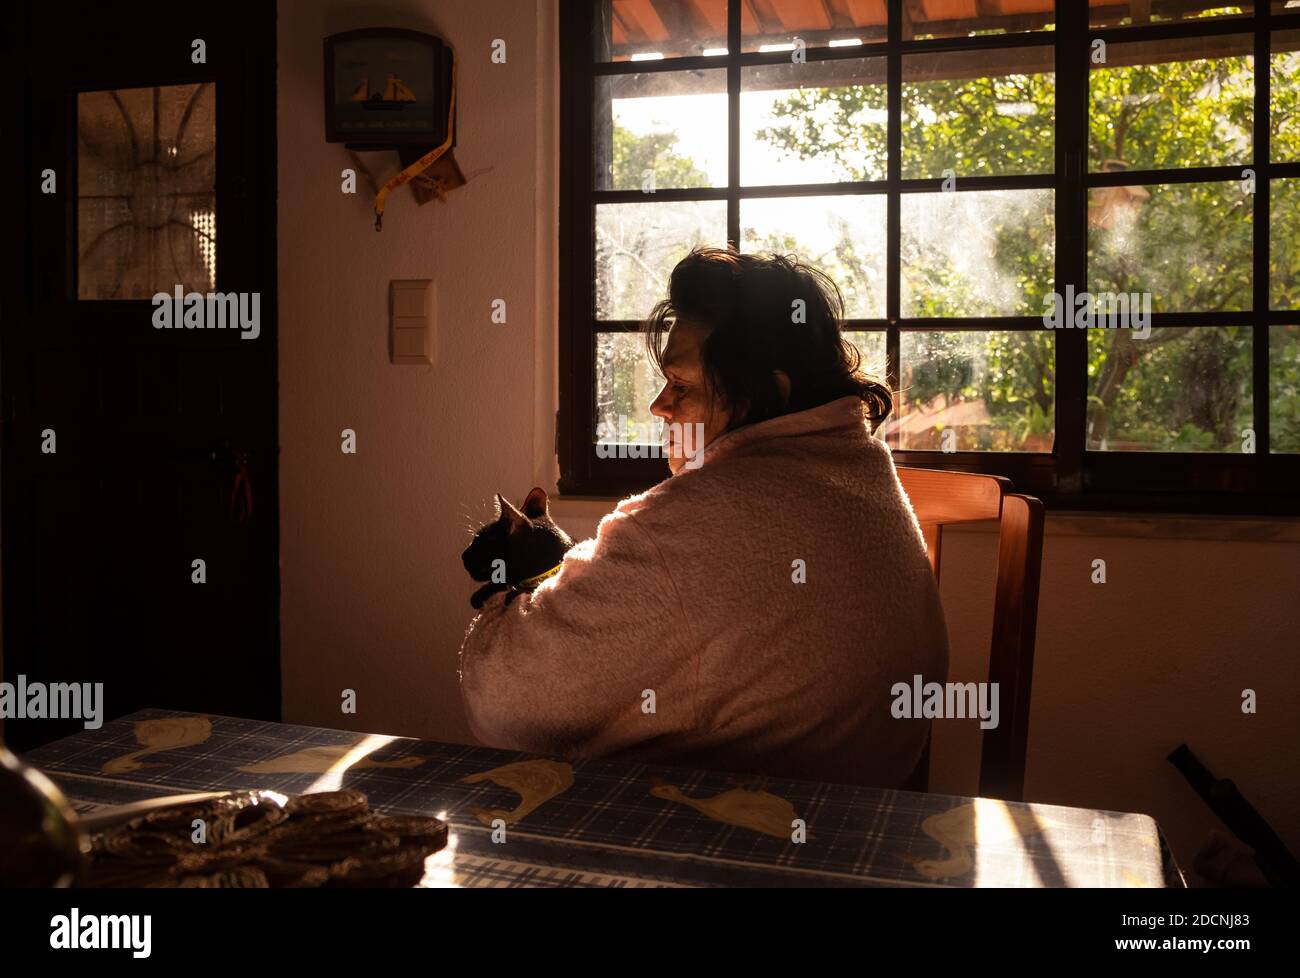 Elderly woman embracing her cat in her living room near a window, during 2020 home quarantine for coronavirus COVID-19 epidemic. Stock Photo